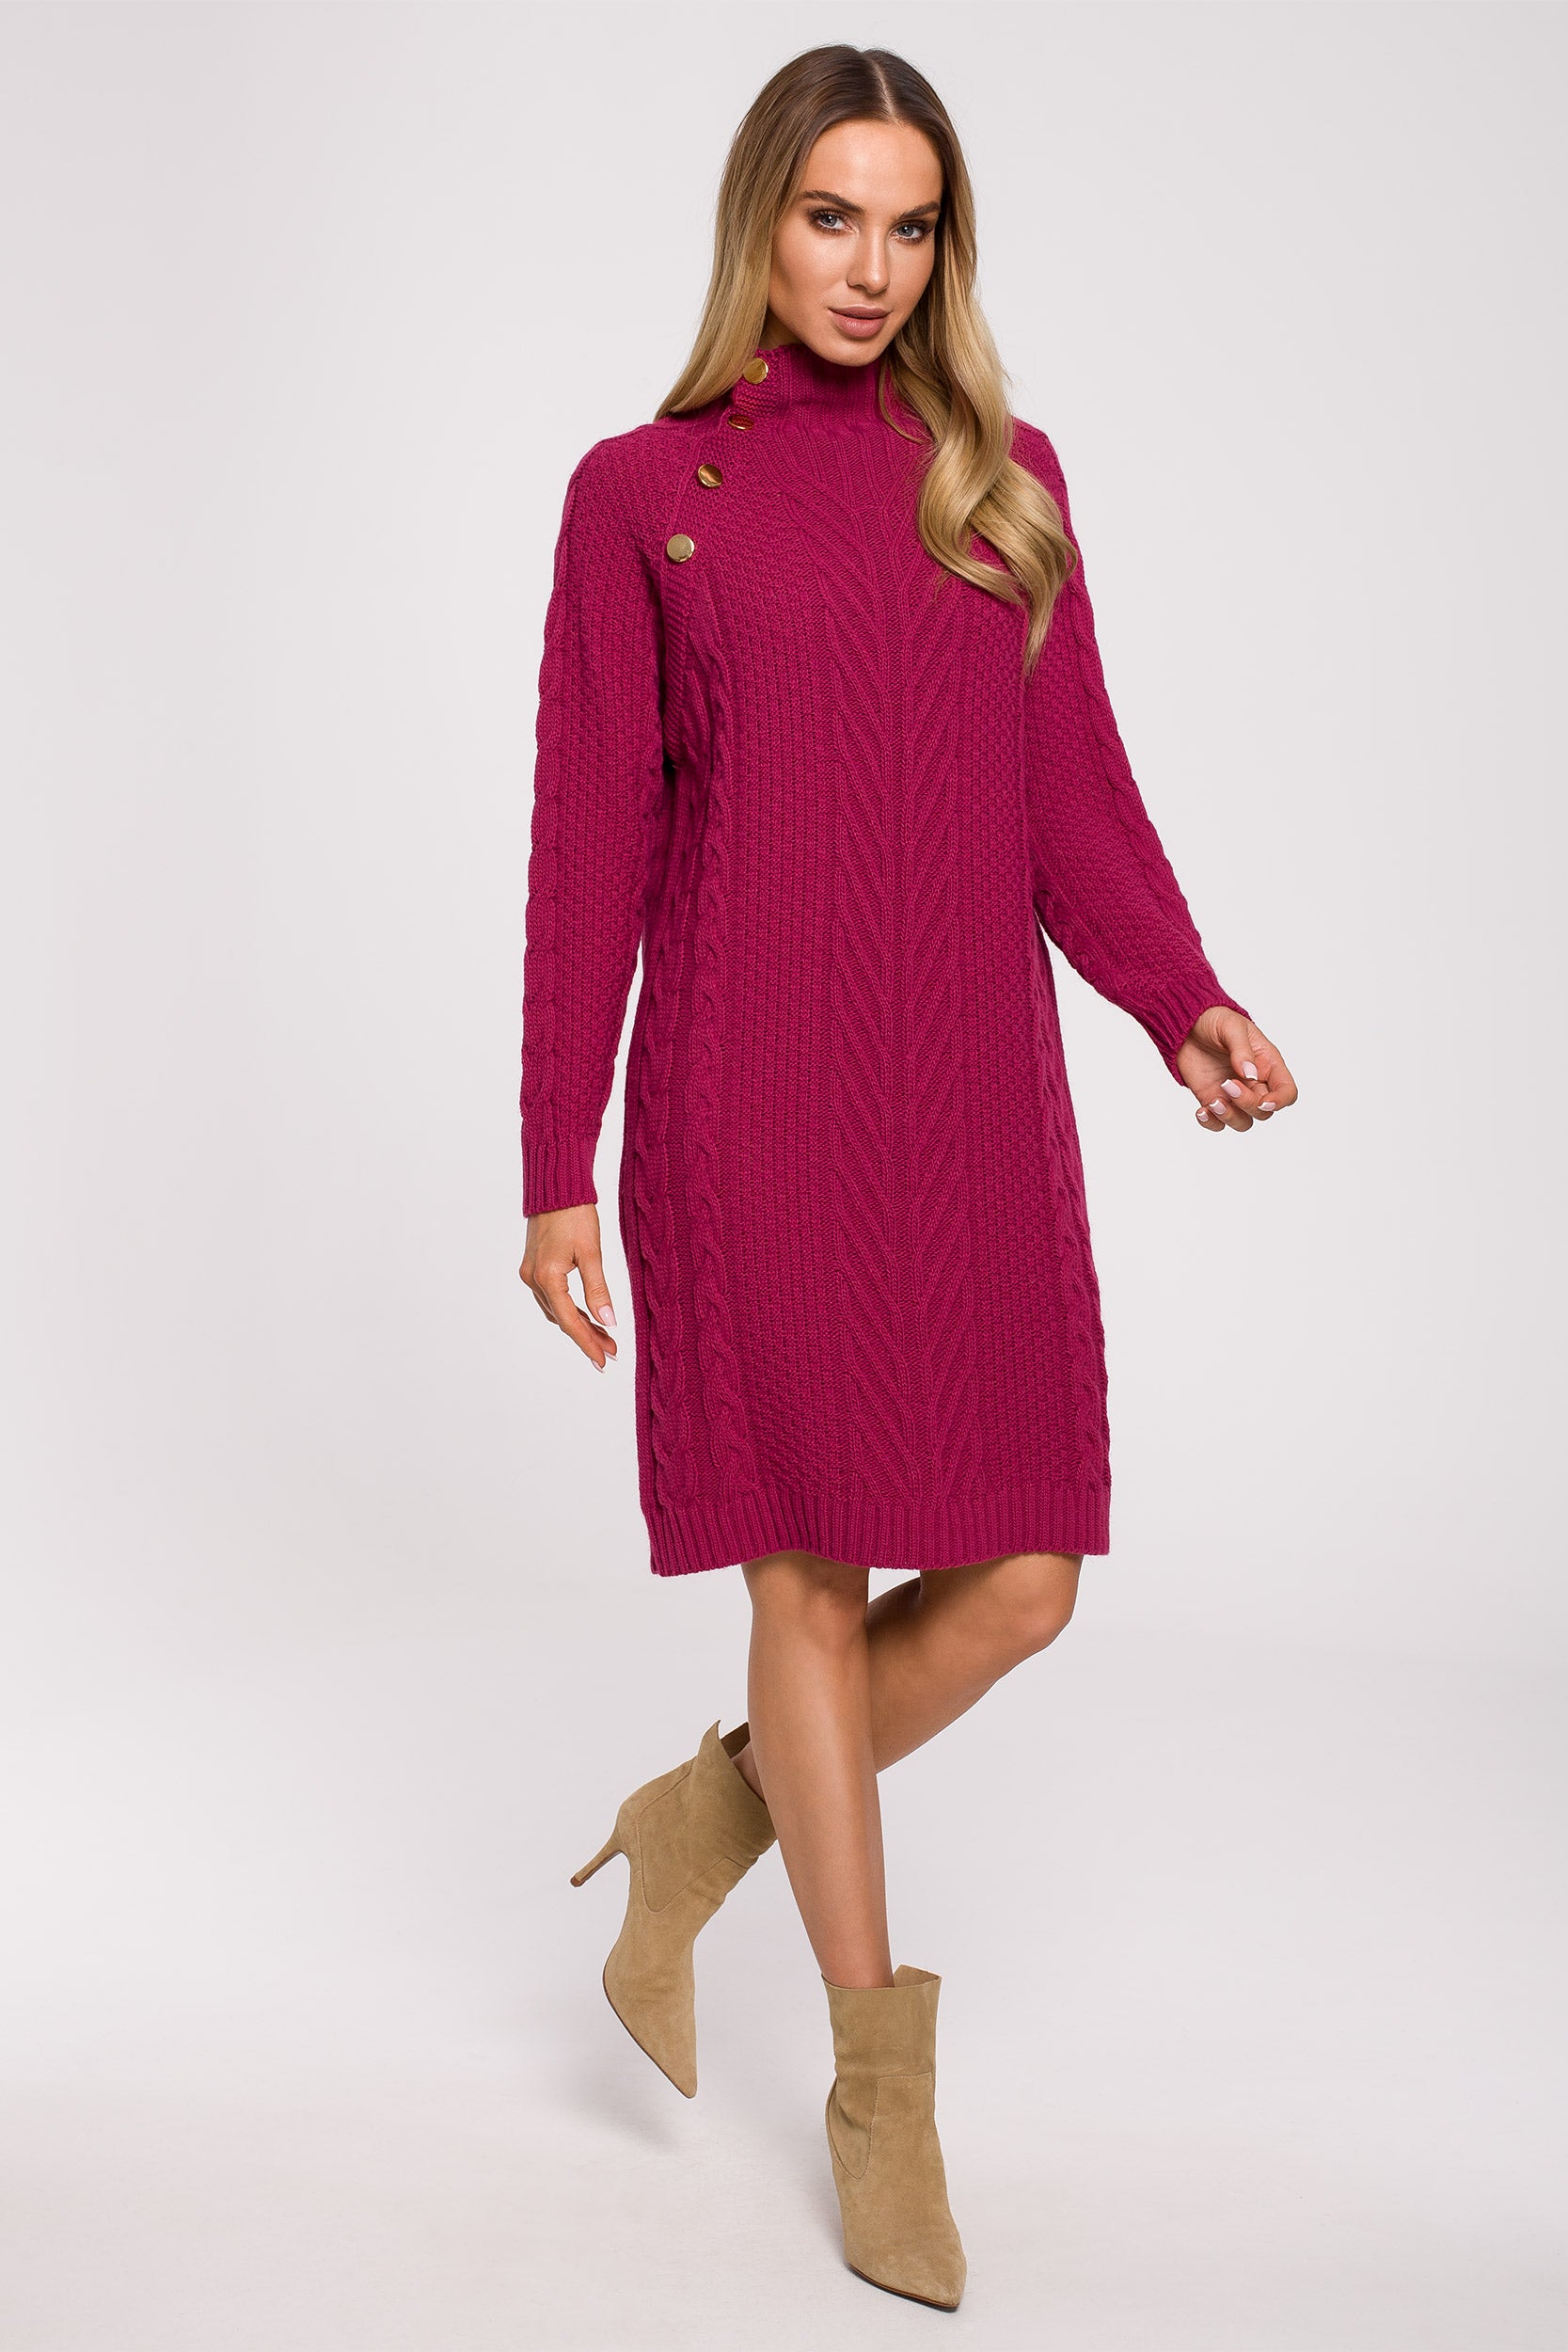 High Neck Knit Sweater Dress | Strictly In | Embrace winter with our elegant High Neck Knit Sweater Dress. Featuring a high neck adorned with golden buttons, this cozy knit dress seamlessly combines style and comfort for a sophisticated look during the cold season.